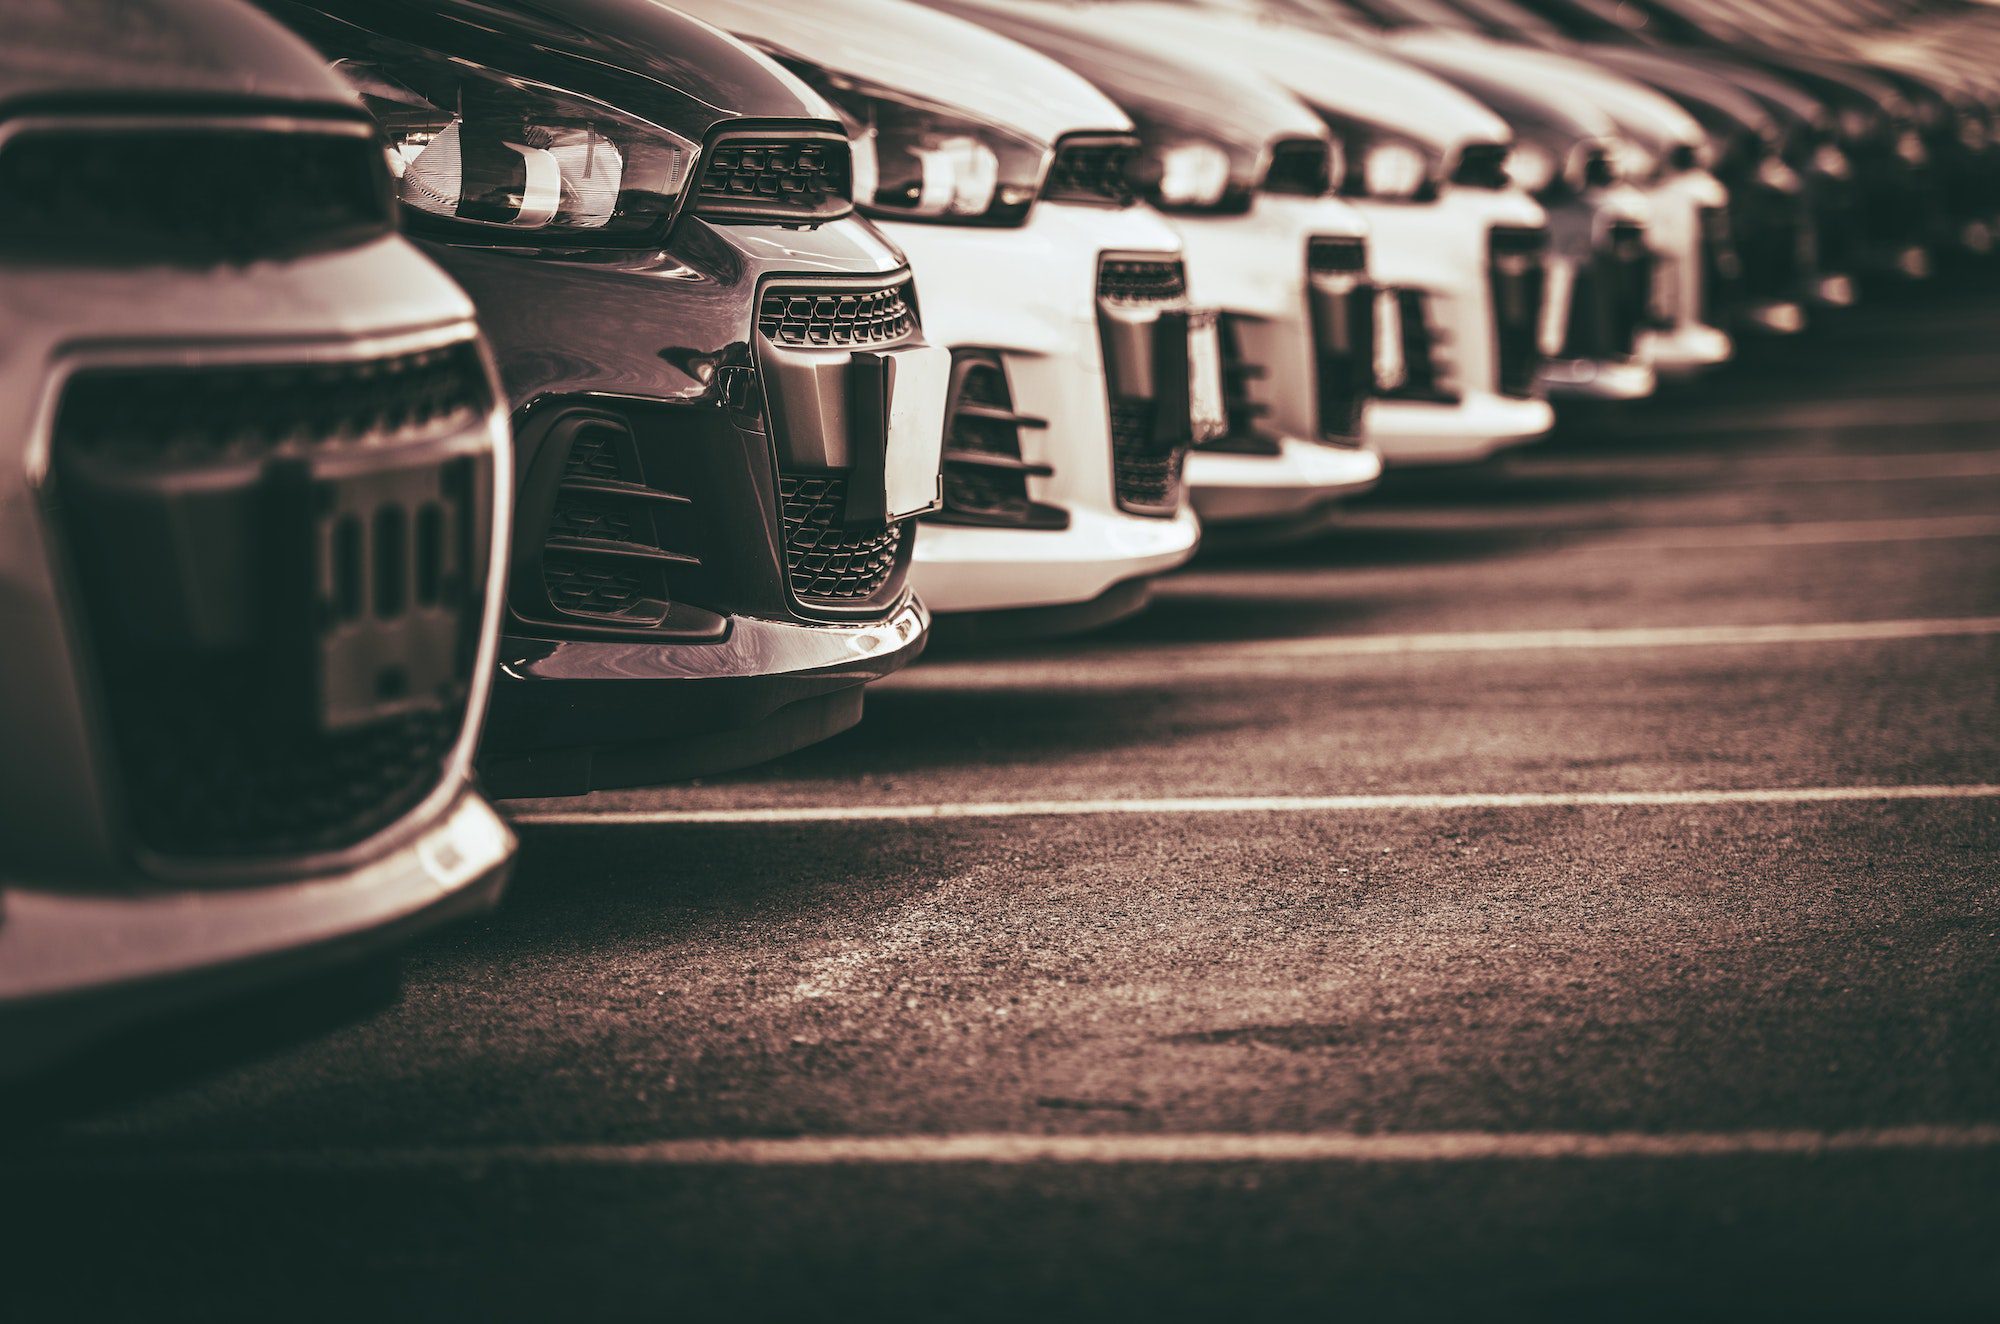 Automotive Sales Leads - How To Caputure And Generate Leads From Your Own Website